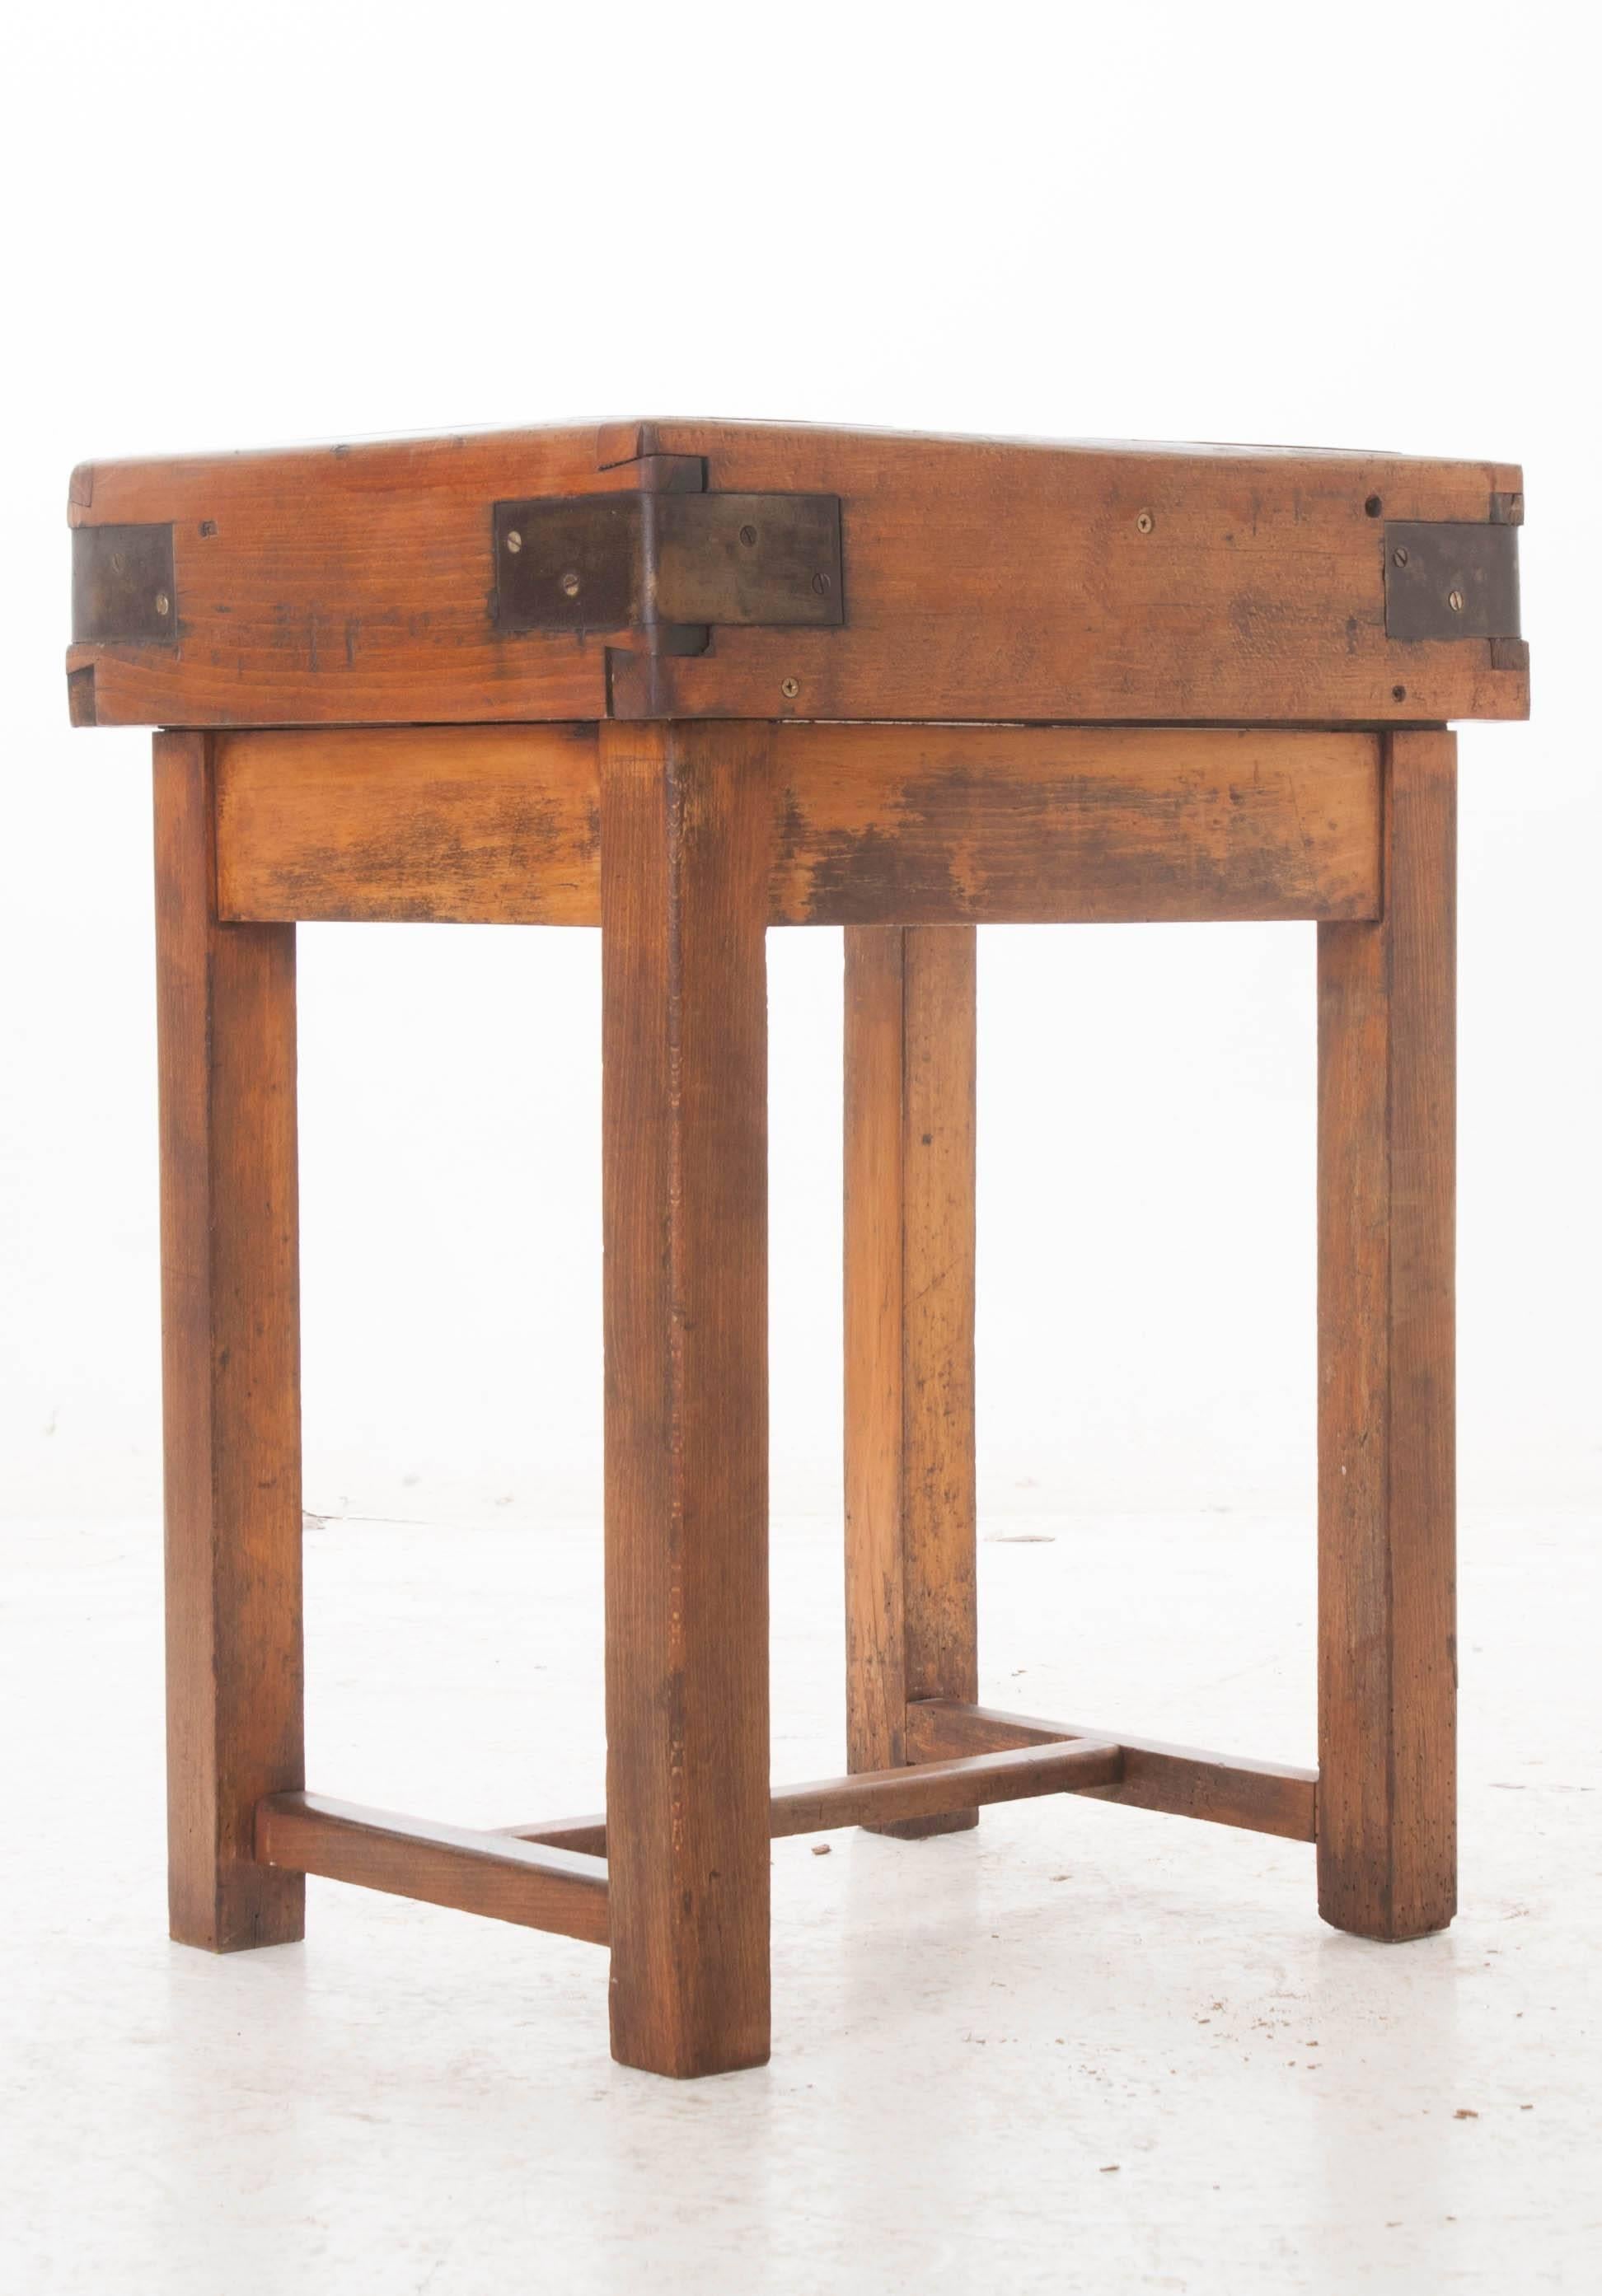 A wonderful pine table with bound butcher block top from 19th century, France. This functional antique teems with character and has acquired a phenomenal patina over its lifetime. Knife marks left from butchers and cooks long ago can still be seen